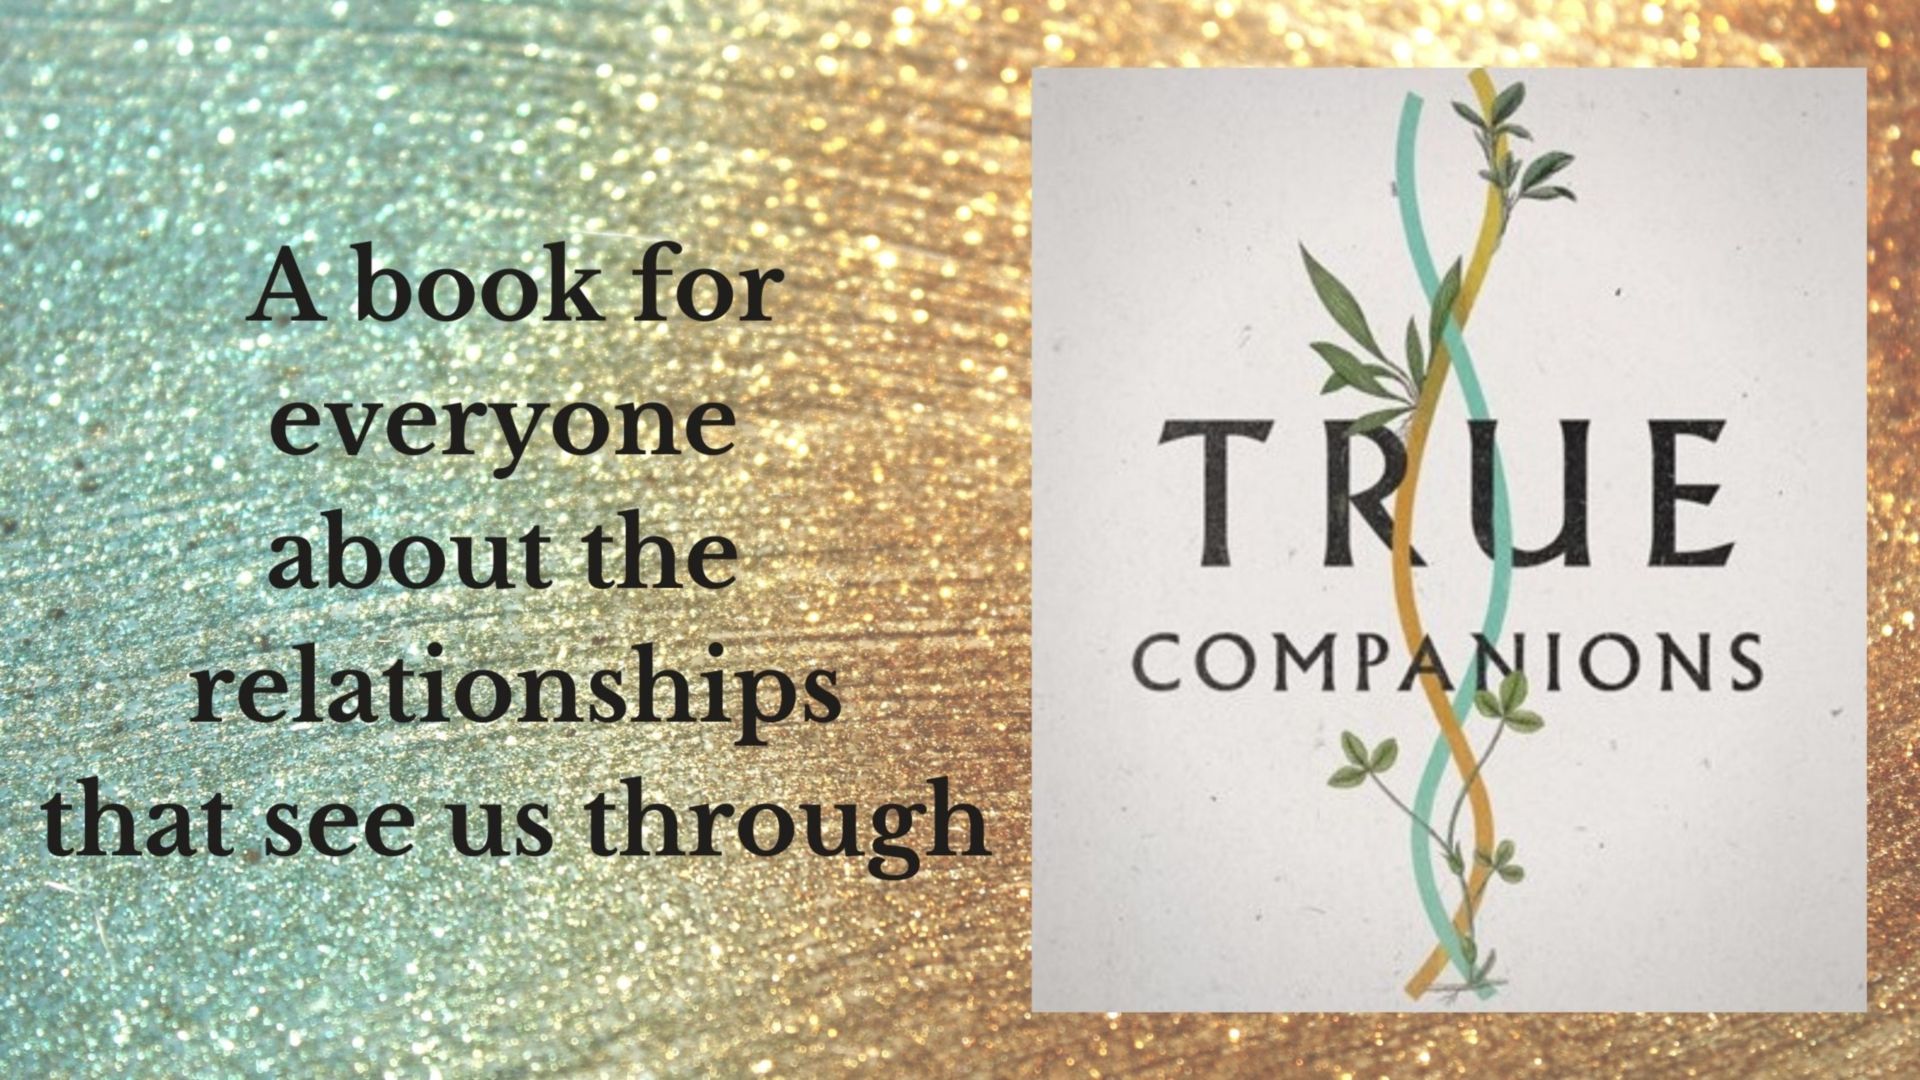 A book review on 'True Companions' by Kelly Flanagan